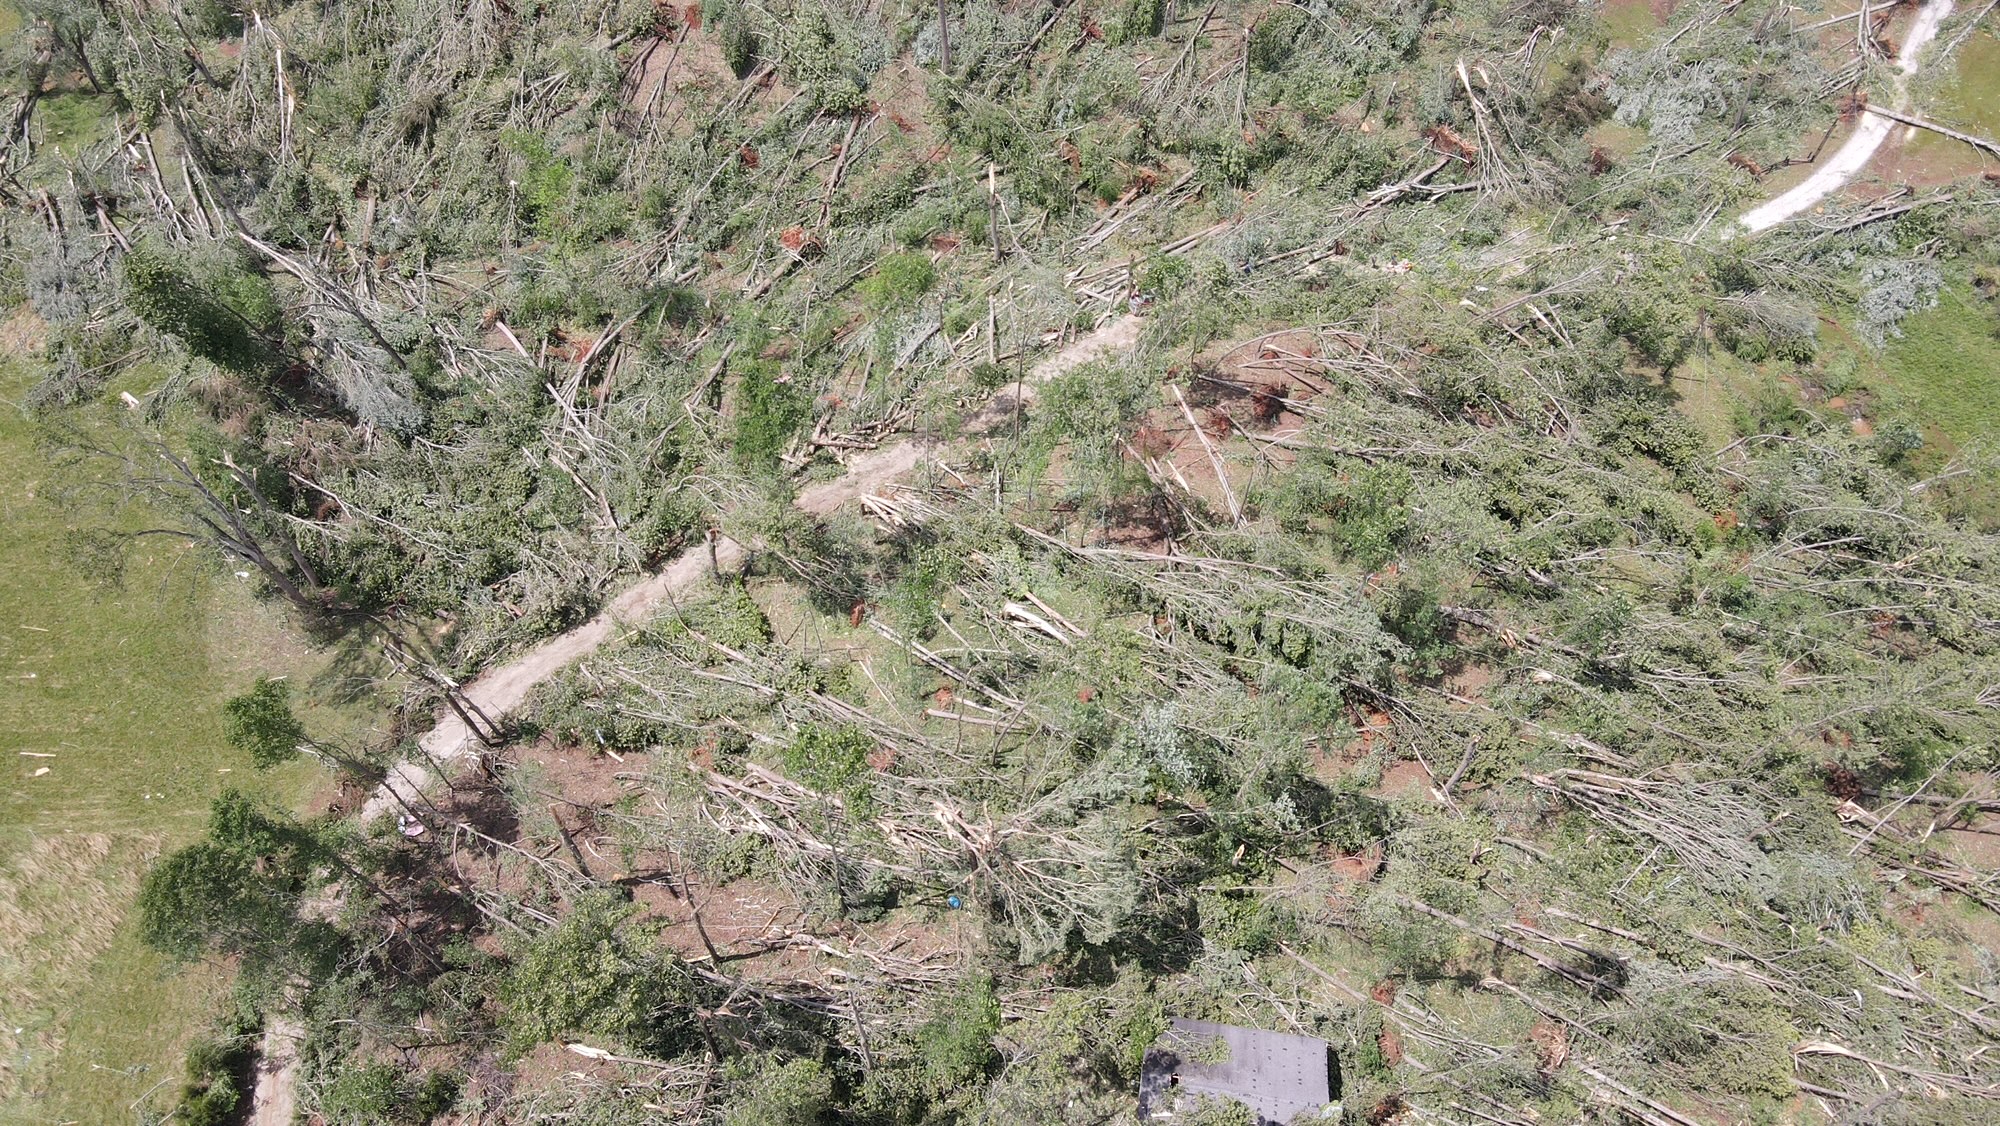 Drone Footage of Tree Damage in Bedford County, VA May 27th, 2022